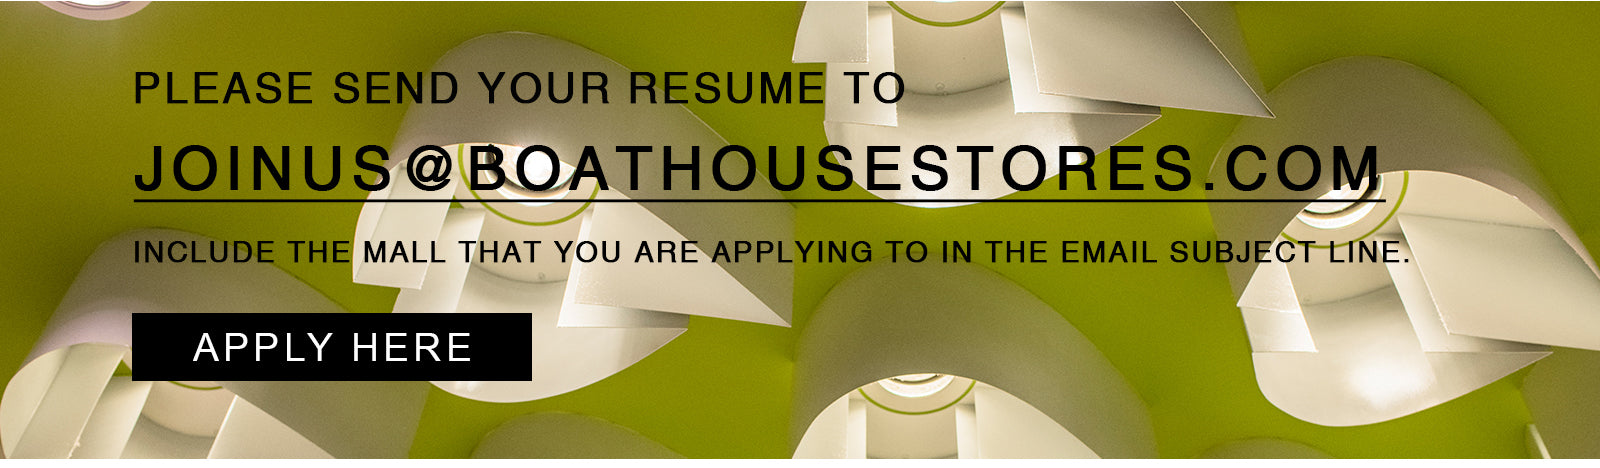 APPLY HERE - PLEASE SEND YOUR RESUME TO JOINUS@BOATHOUSESTORES.COM INCLUDE THE MALL THAT YOU ARE APPLYING TO IN THE EMAIL SUBJECT LINE.